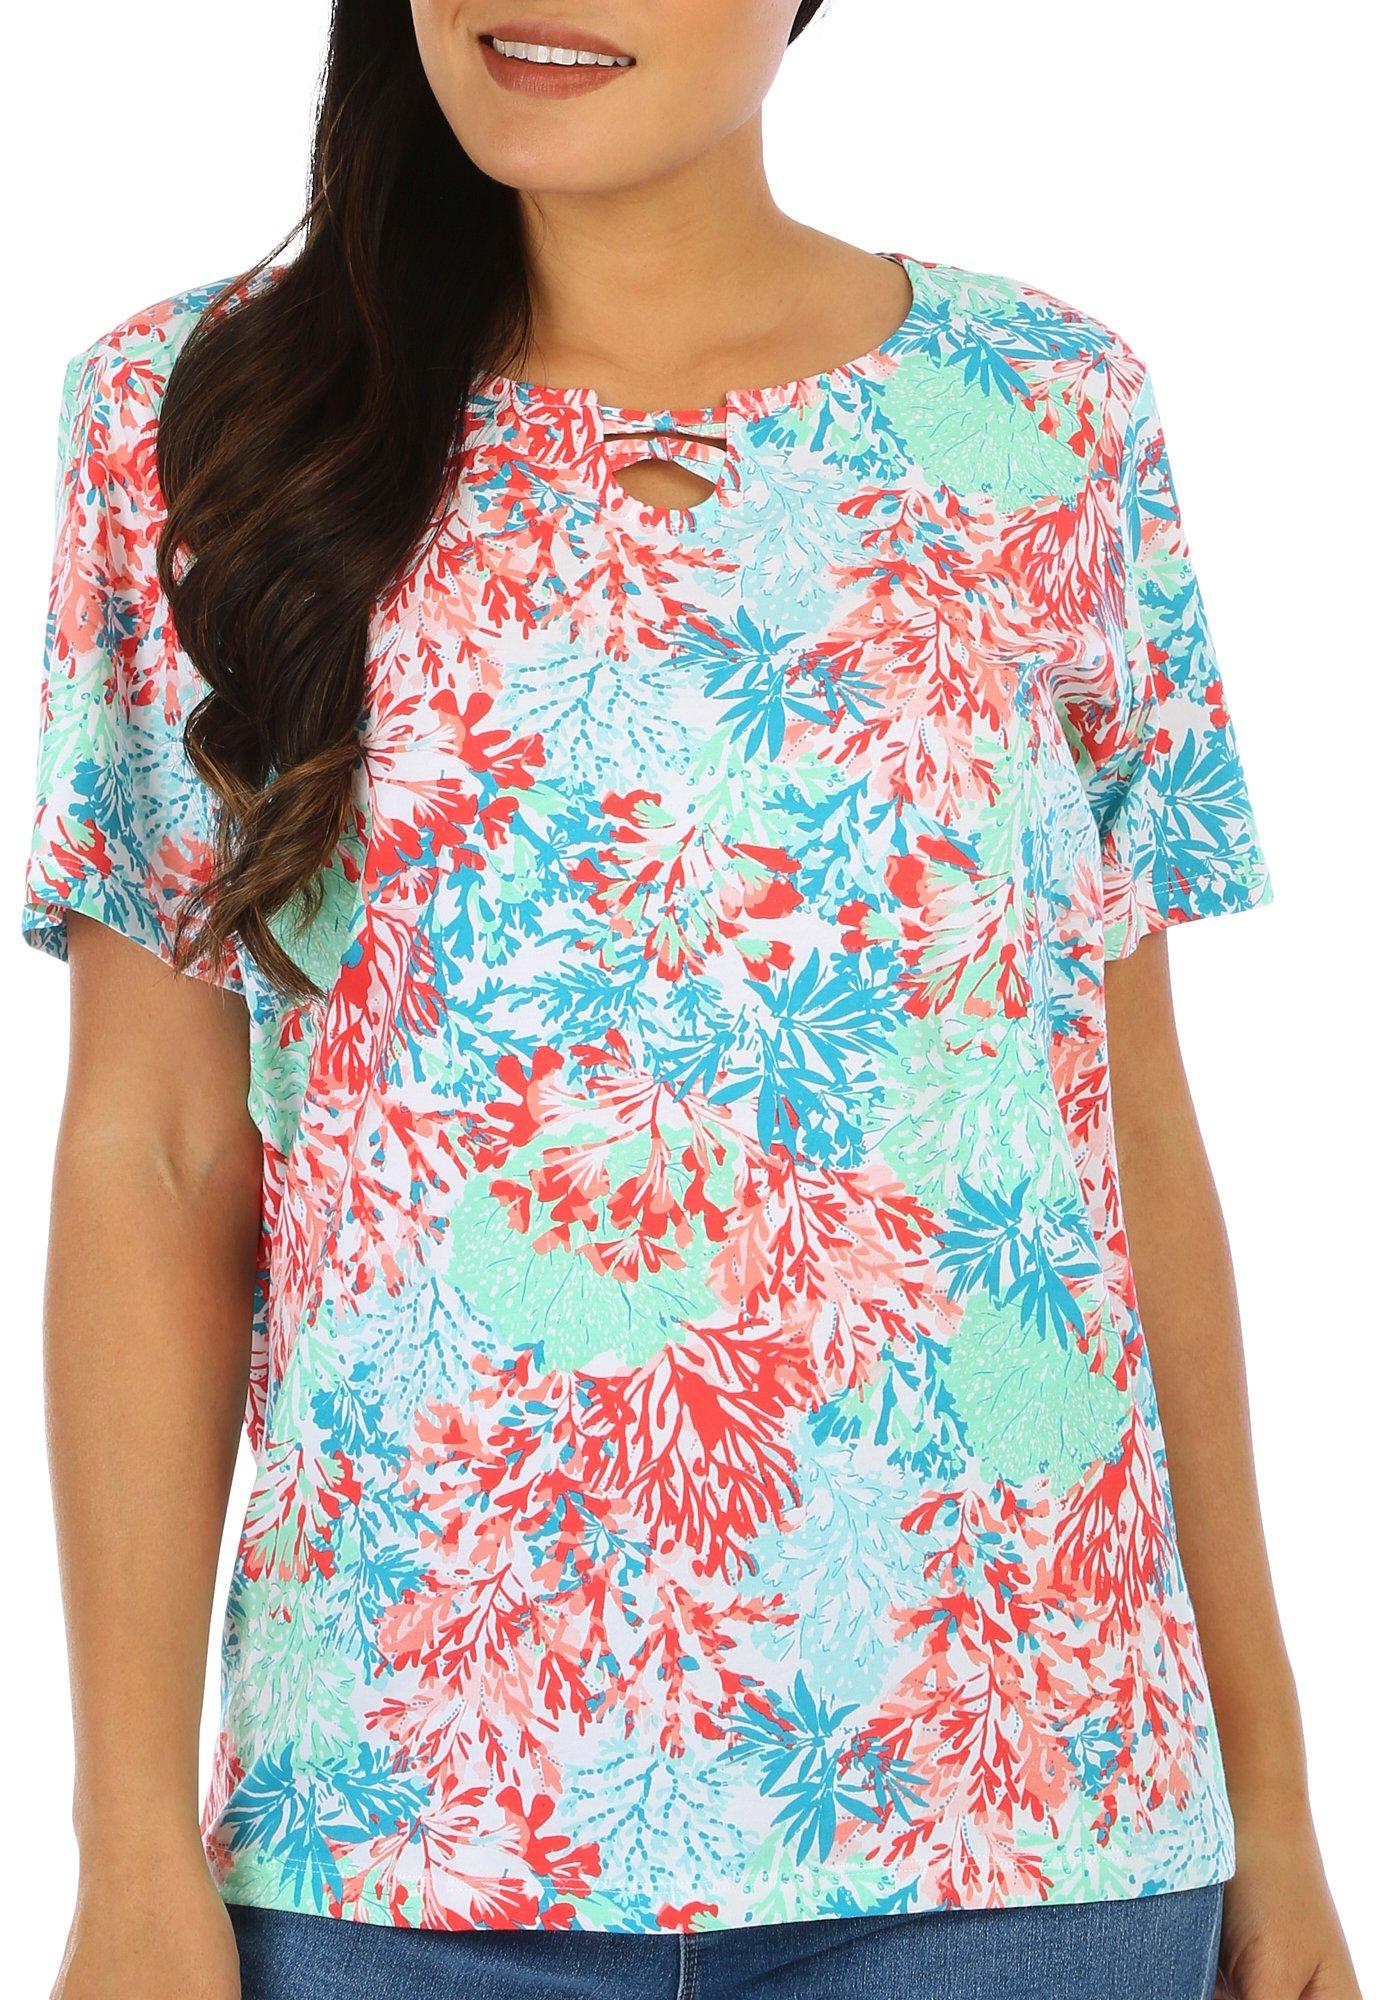 Coral Bay Womens Print Tie Keyhole Short Sleeve Top